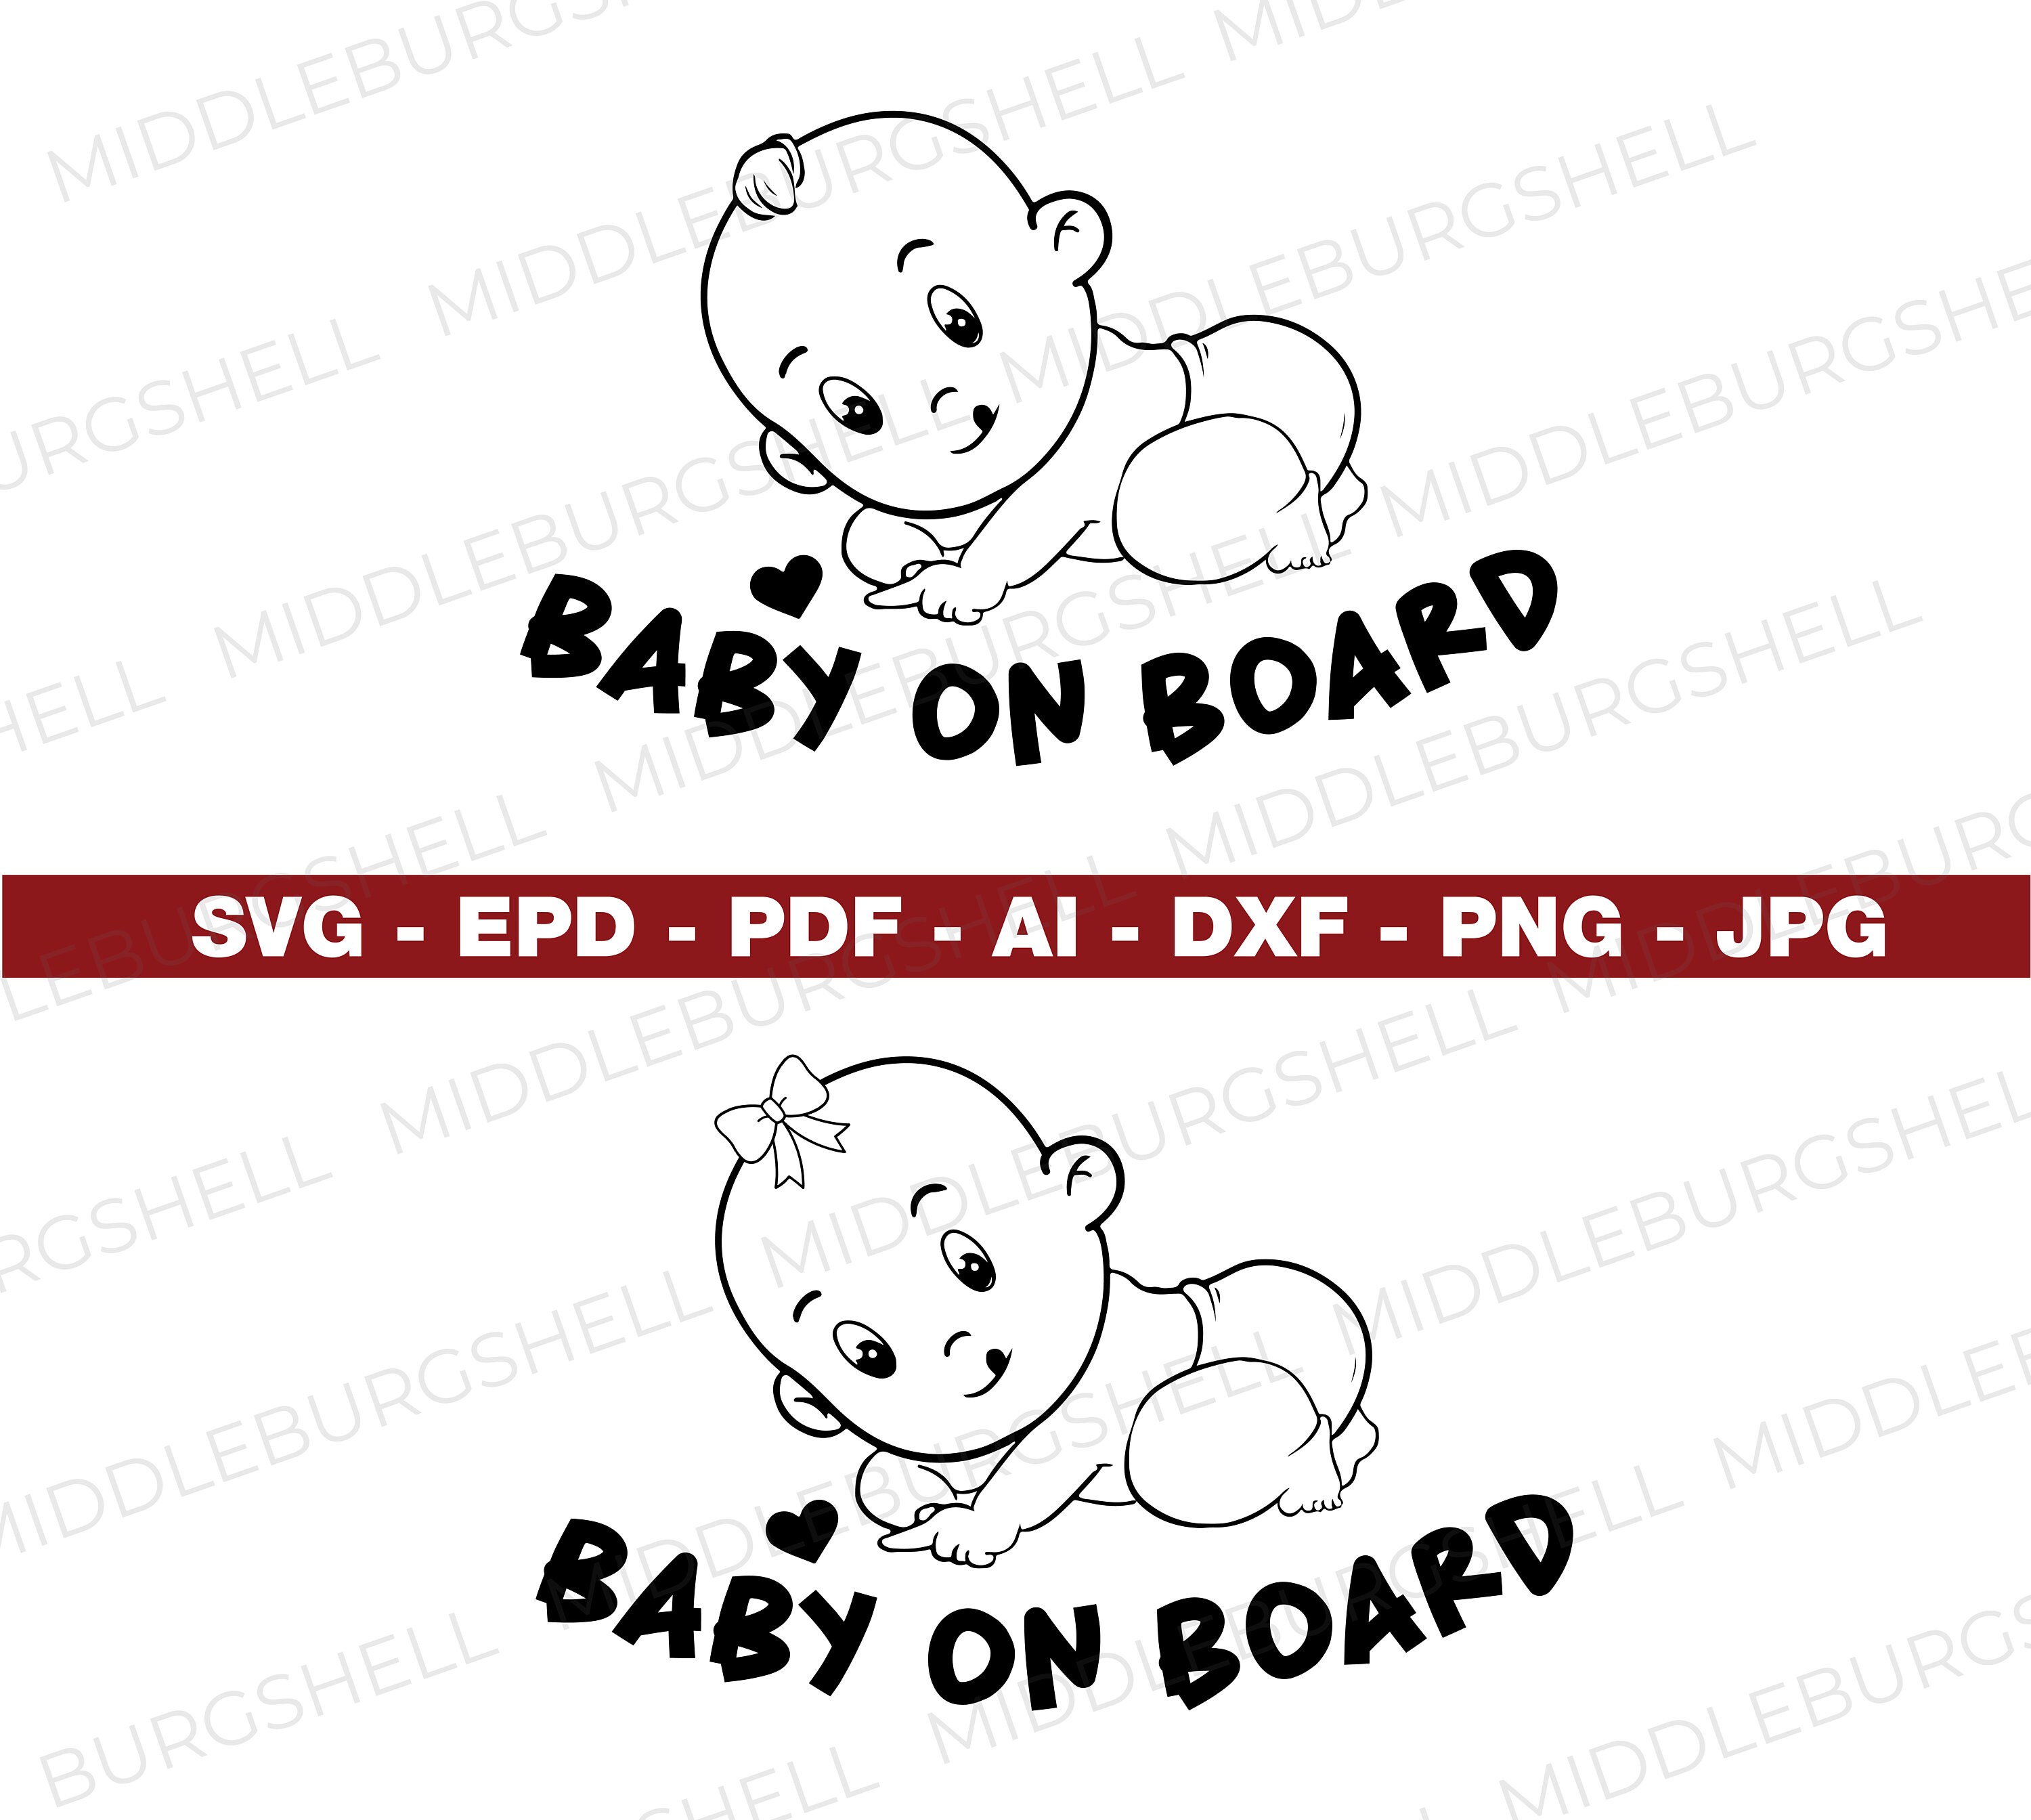 Baby on Board Svg, Car Stickers Labels, Vinyl Decals, Banners, Round Design  with Heart and Feet, Vehicle Newborn Baby Sign - Imagefied